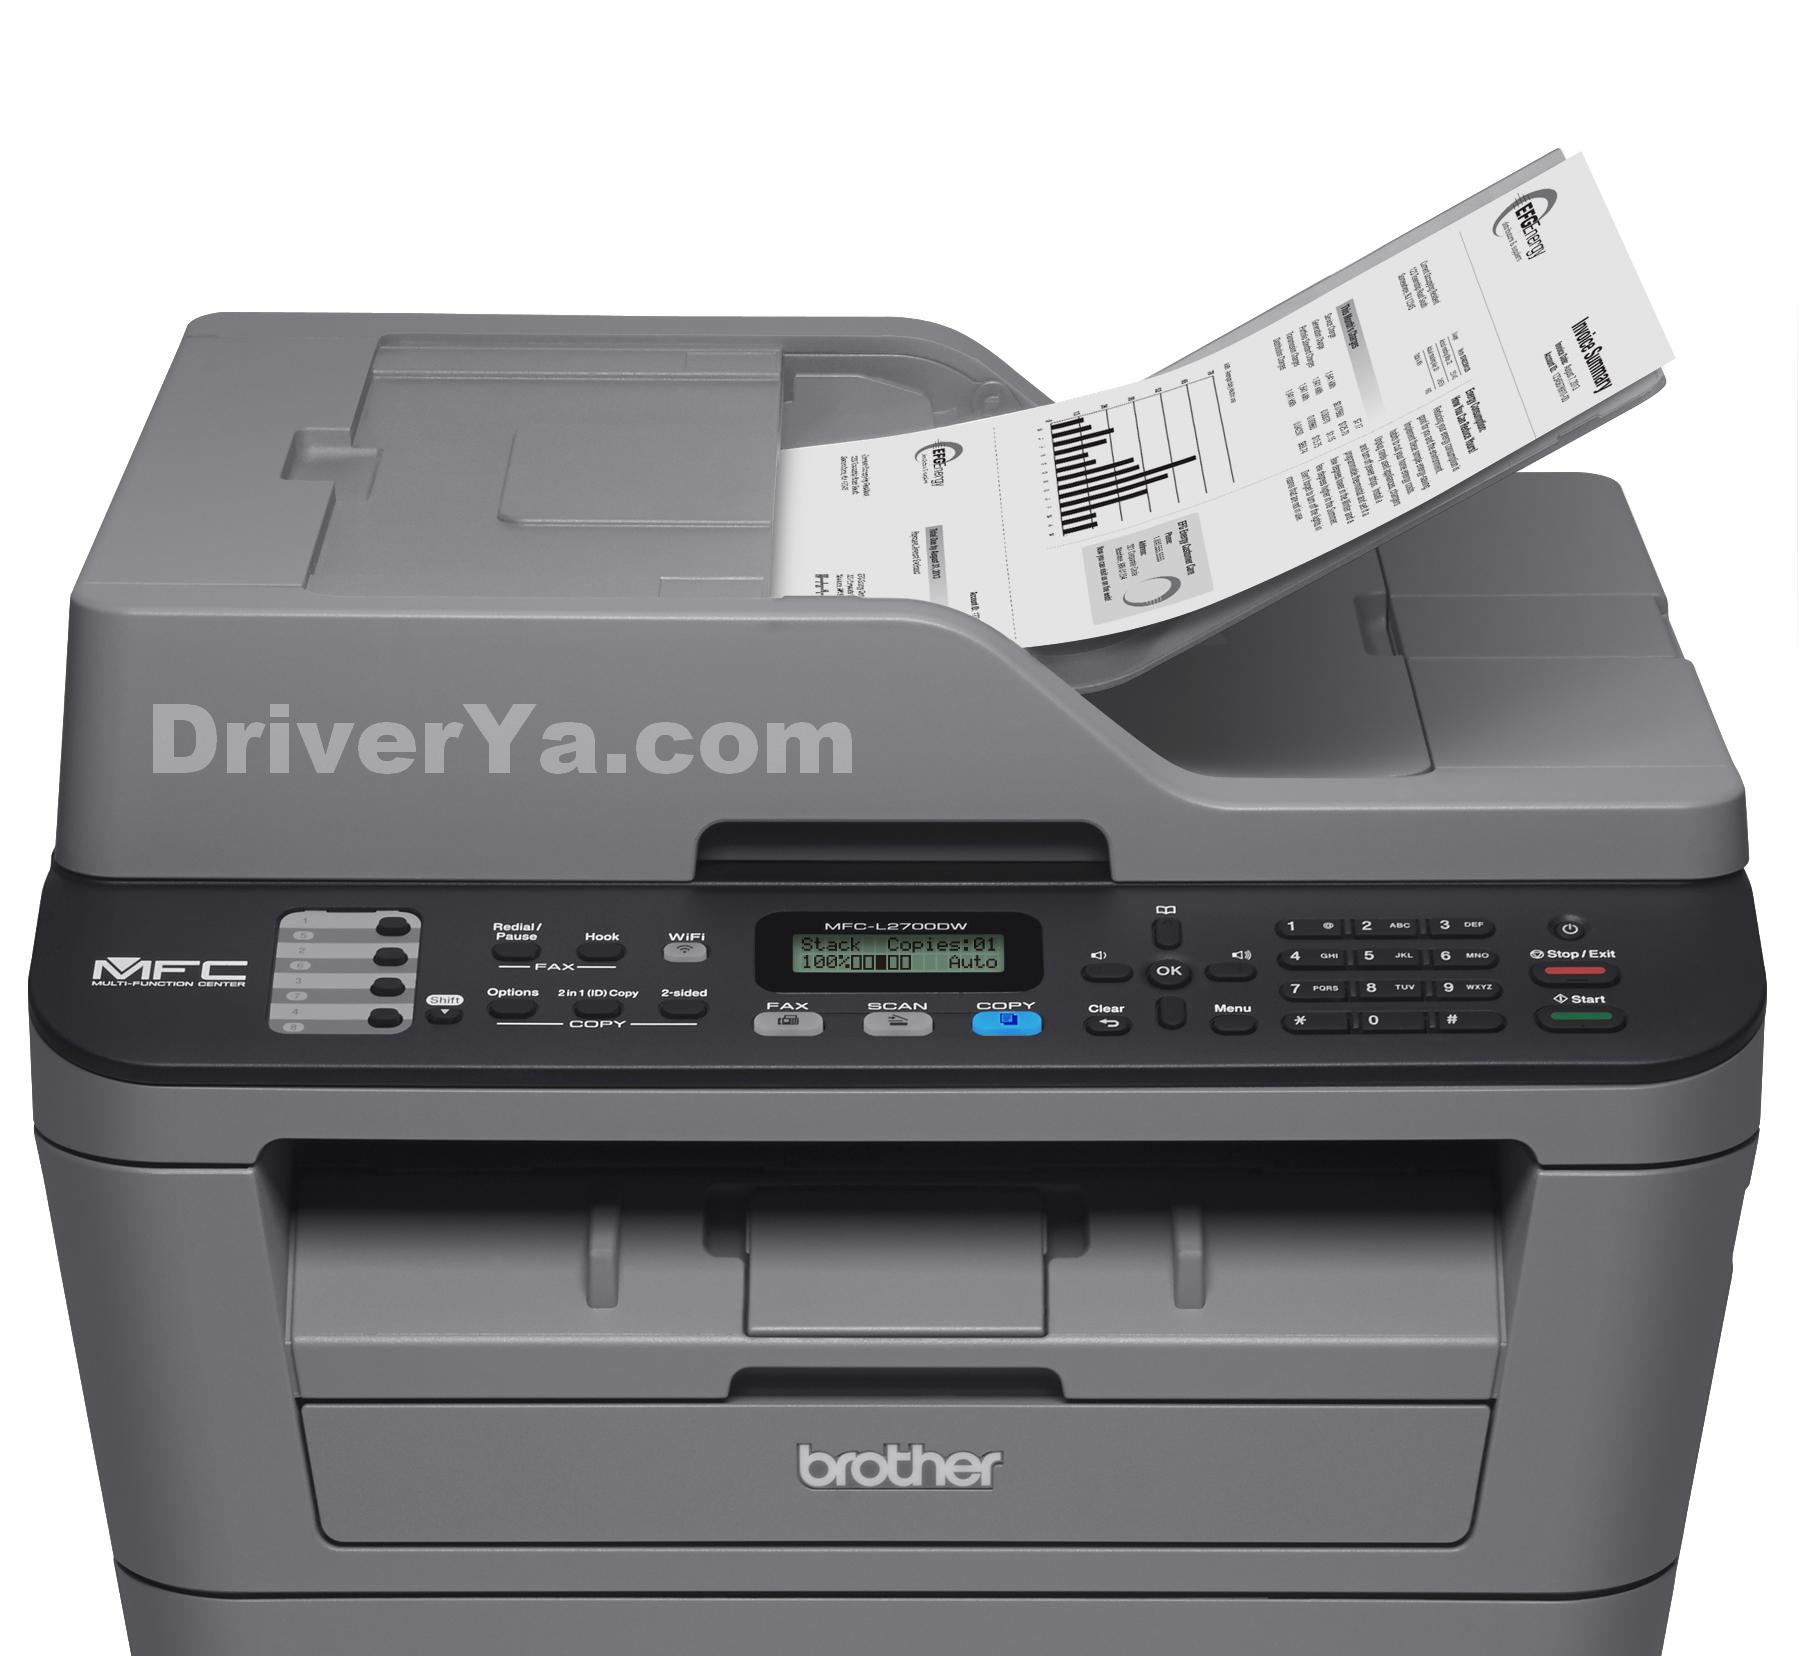 Brother MFCL2700DW DRIVER DOWNLOAD FOR WINDOWS AND MAC Software